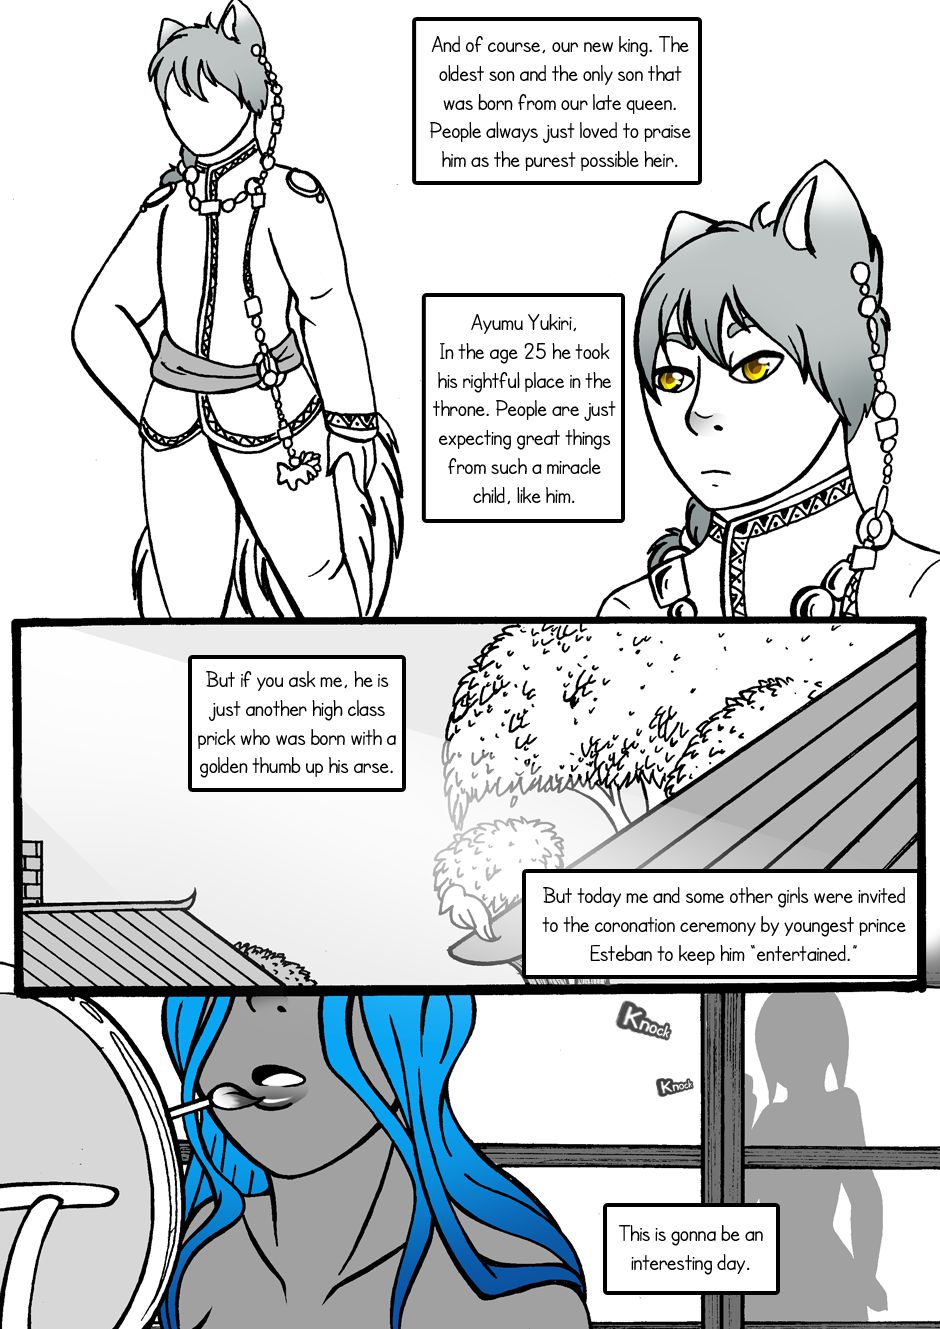 [Jeny-jen94]Between Kings and Queens[ongoing] 18